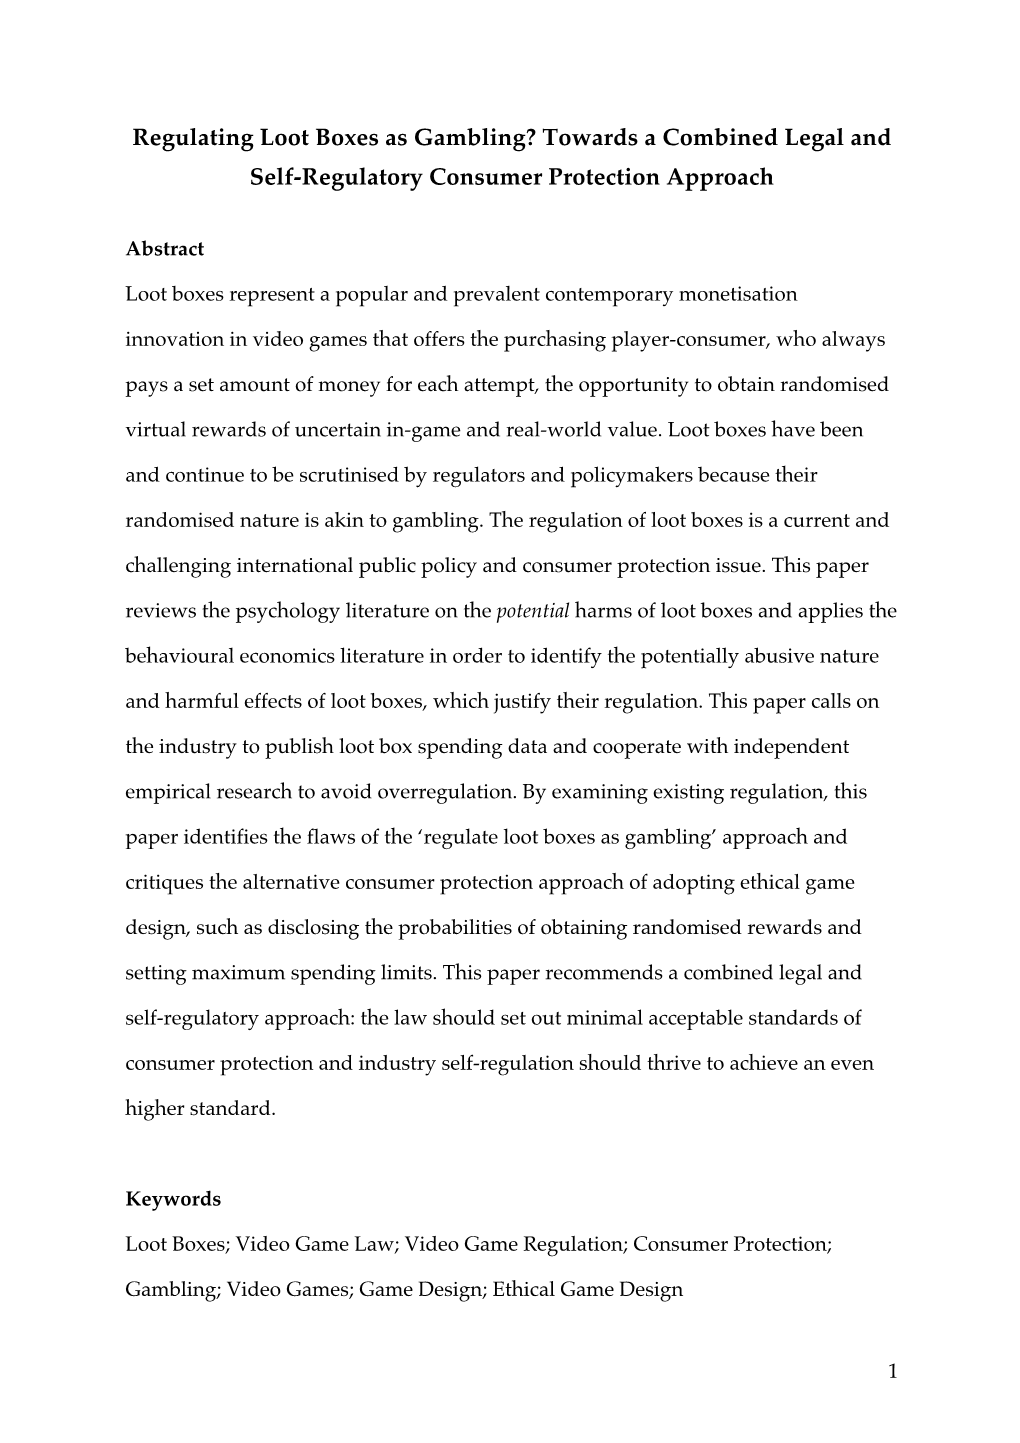 Regulating Loot Boxes As Gambling? Towards a Combined Legal and Self-Regulatory Consumer Protection Approach